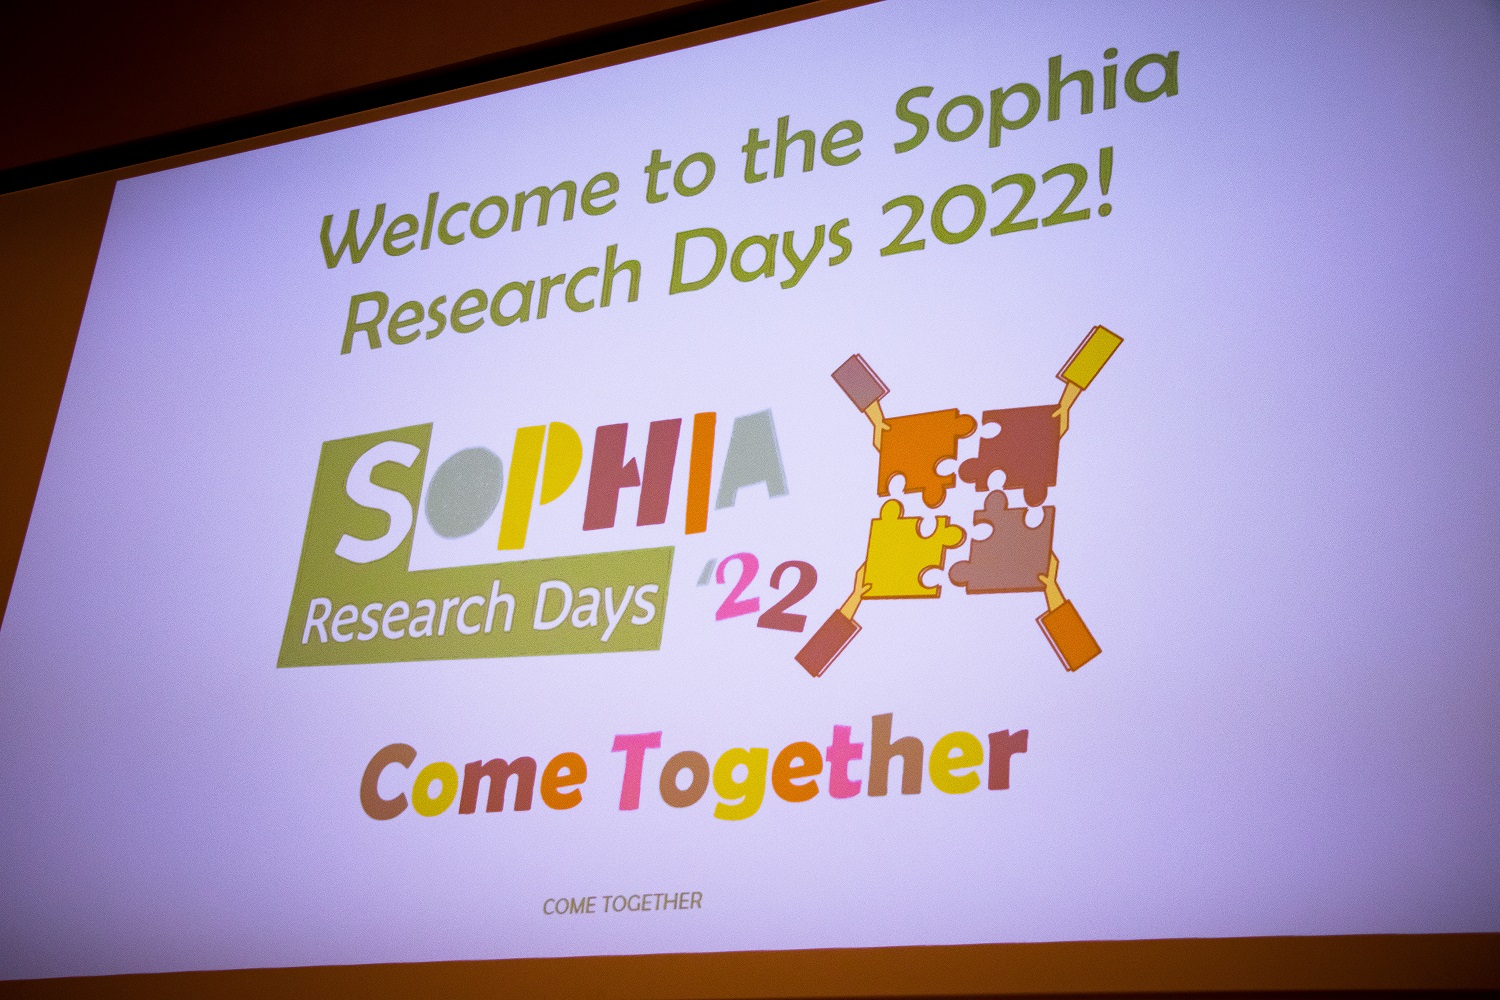 Previous edition Sophia Research Days 2022